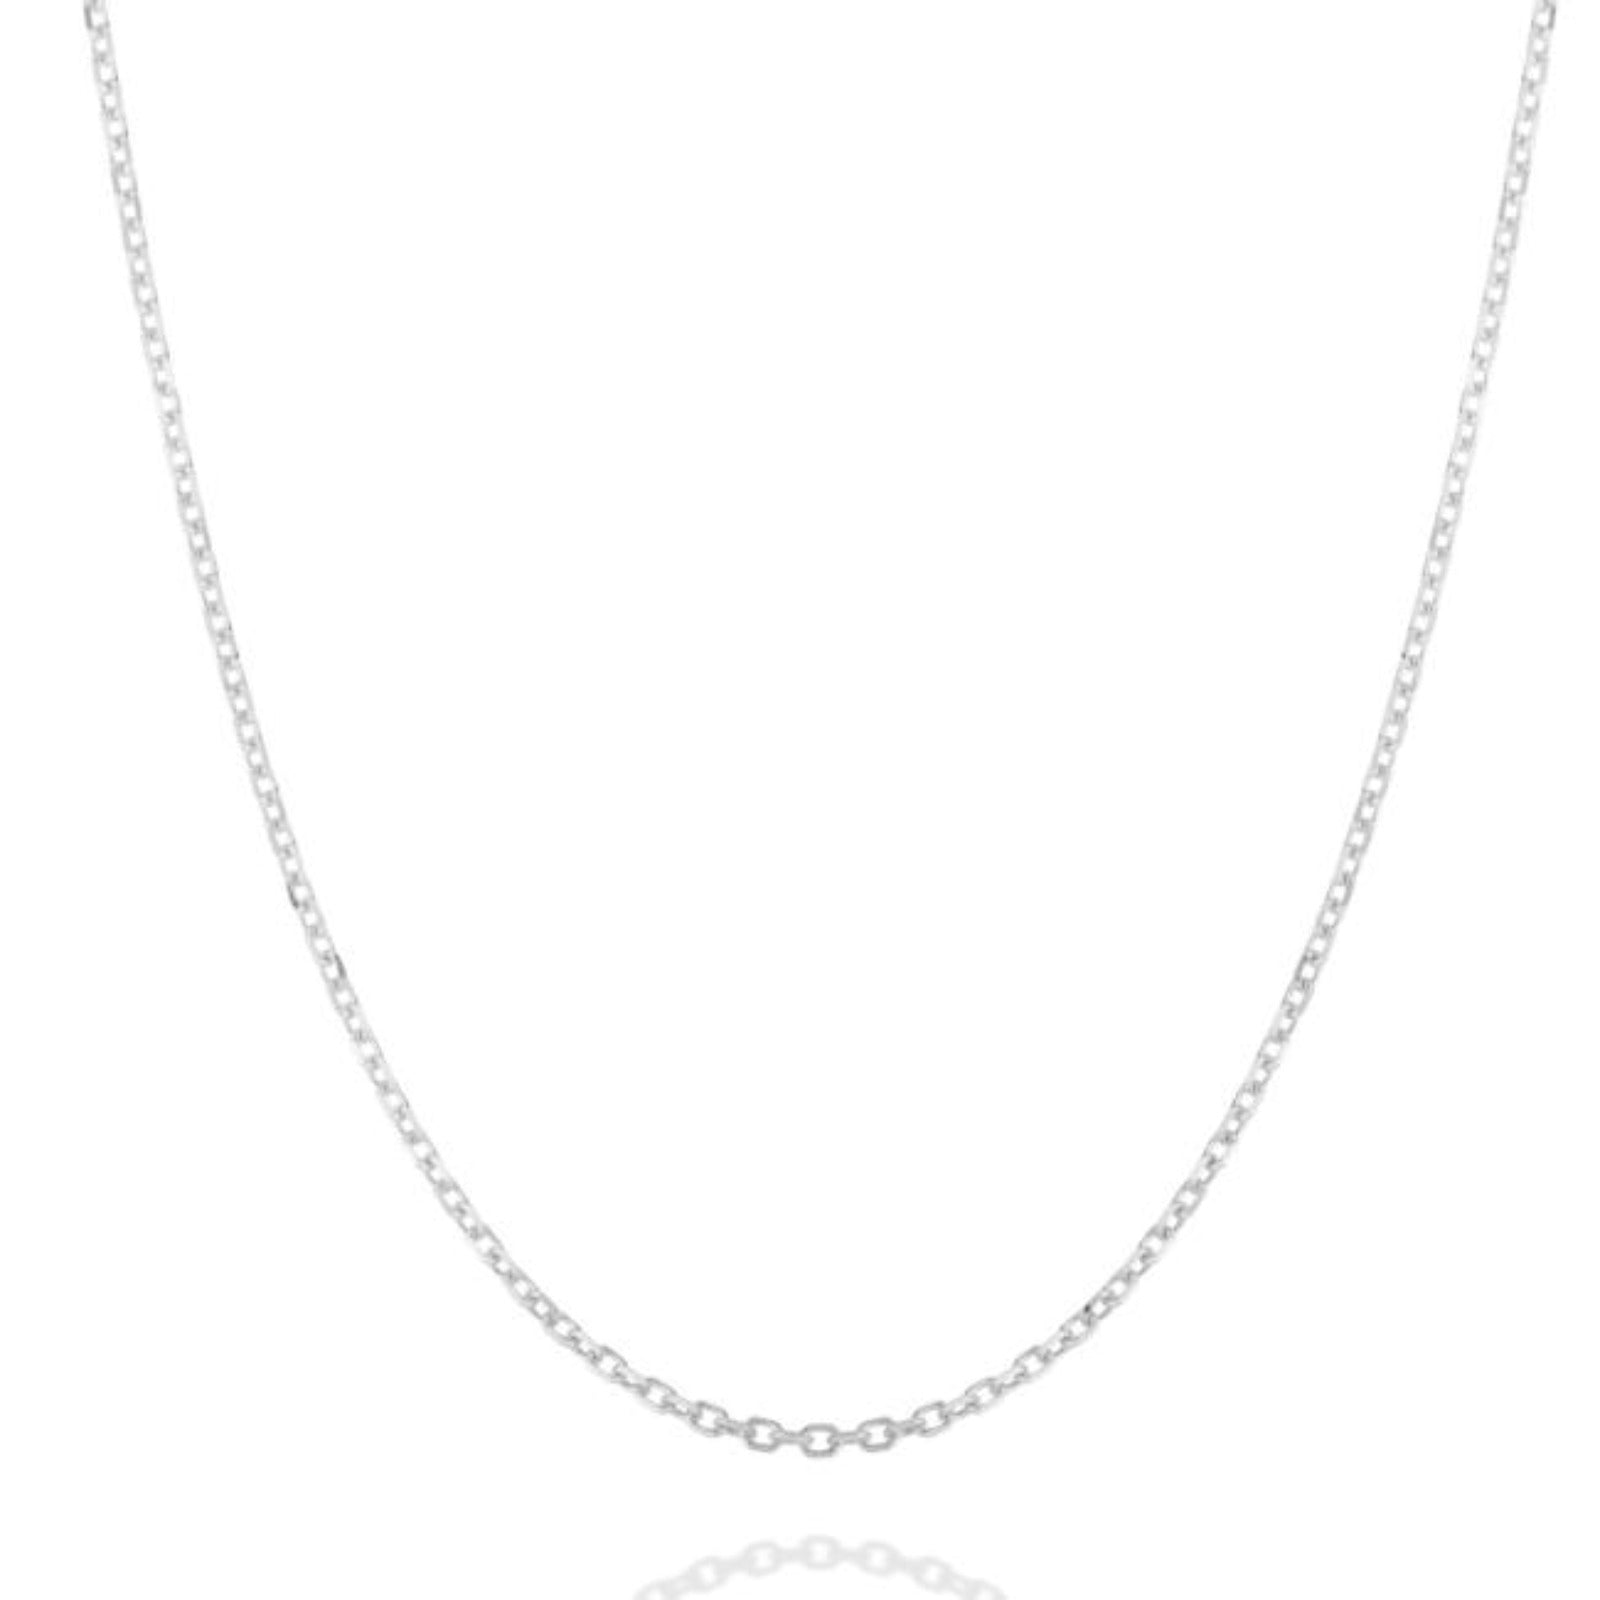 14k white gold Diamond Cut Cable Chain Necklace